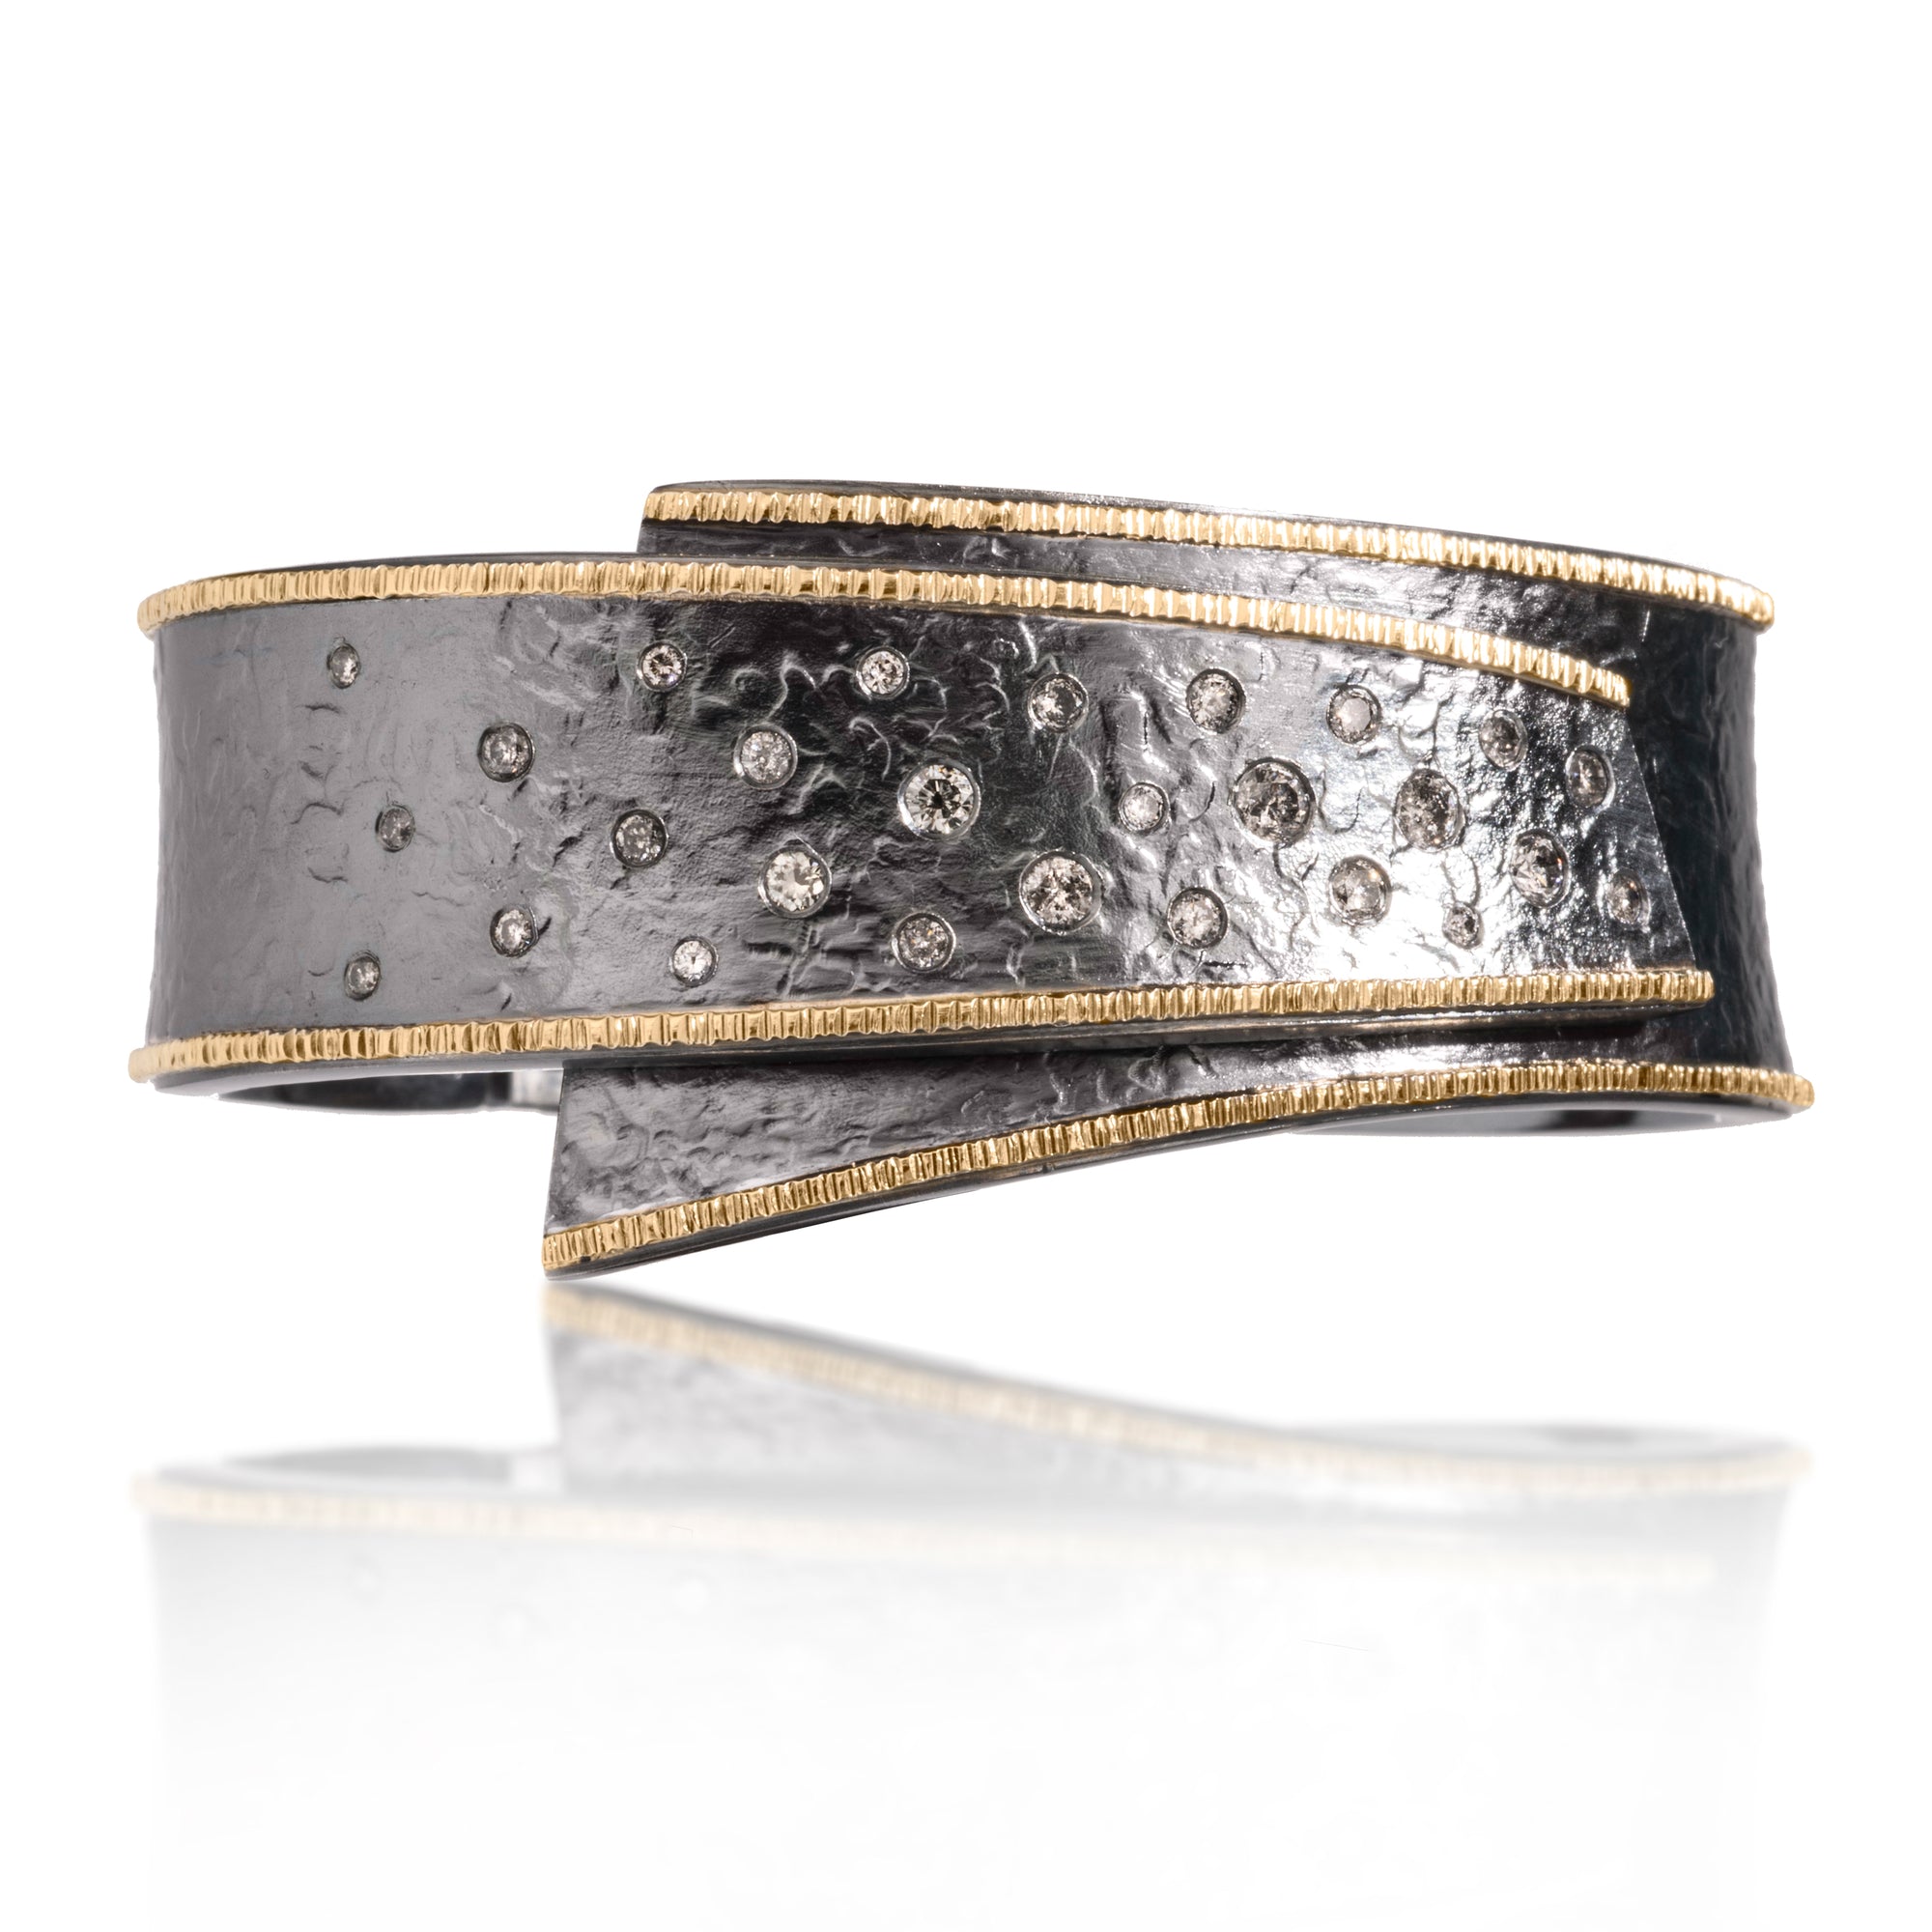 This narrow width Cyclone Cuff is created in 18k gold and oxidized silver featuring a sparkling spray of flush set, assorted white or gray diamonds. A hinge on the back side of this tapered cuff allows it to fully open, making it incredibly easy to put on and off with one hand. Hand fabricated, spring steel hinge, hammer textured. Diamonds 1.00 tcw. Bracelet can be ordered in five different sizes for just the right fit.